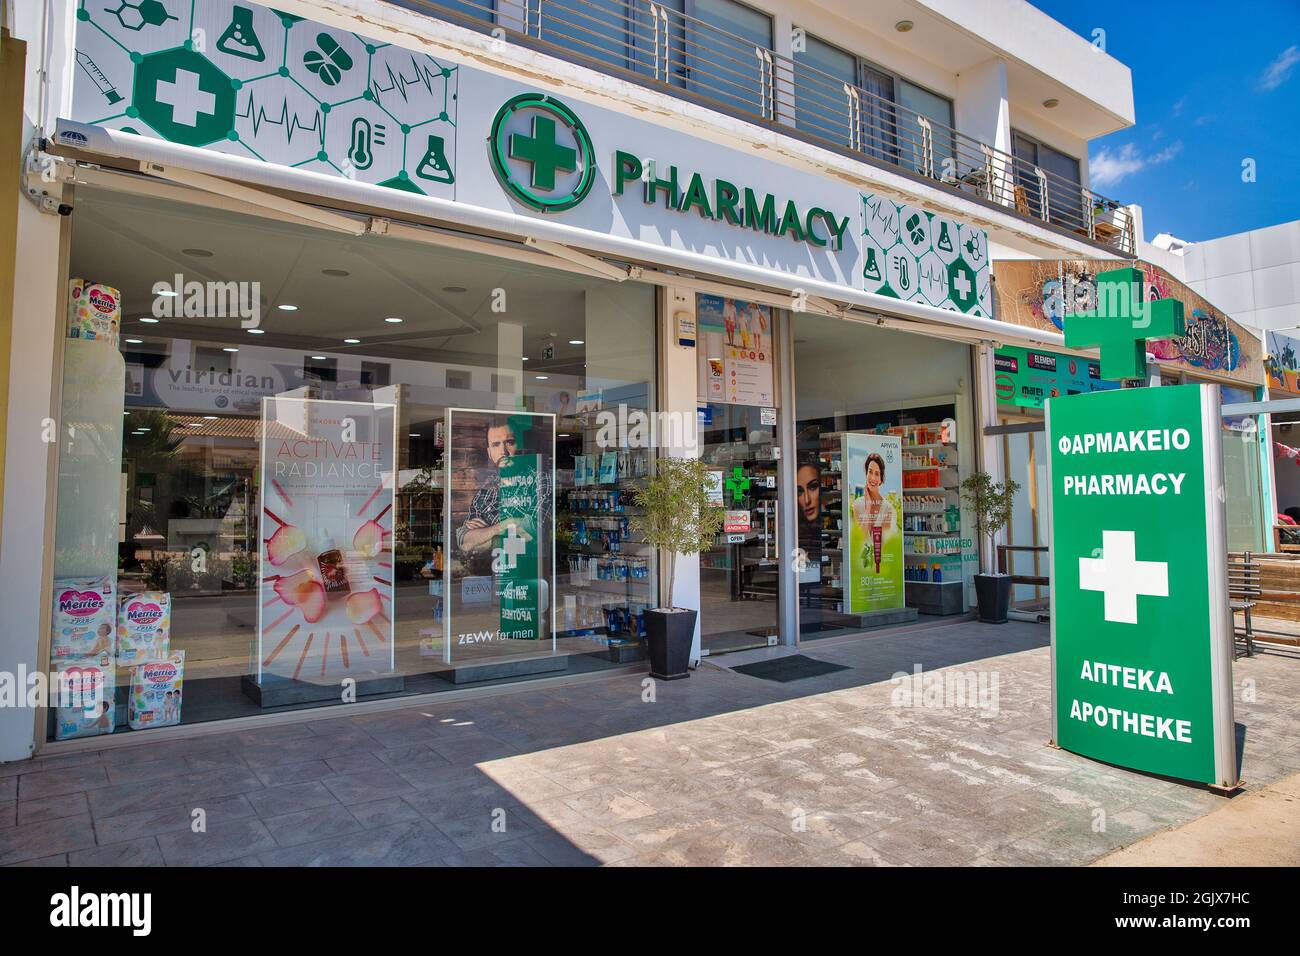 AYIA NAPA, CYPRUS - MAY 23, 2021: Pharmacy facade on summer sunny Nissi Avenue in city center. Ayia Napa is a tourist resort at the far eastern end of Stock Photo